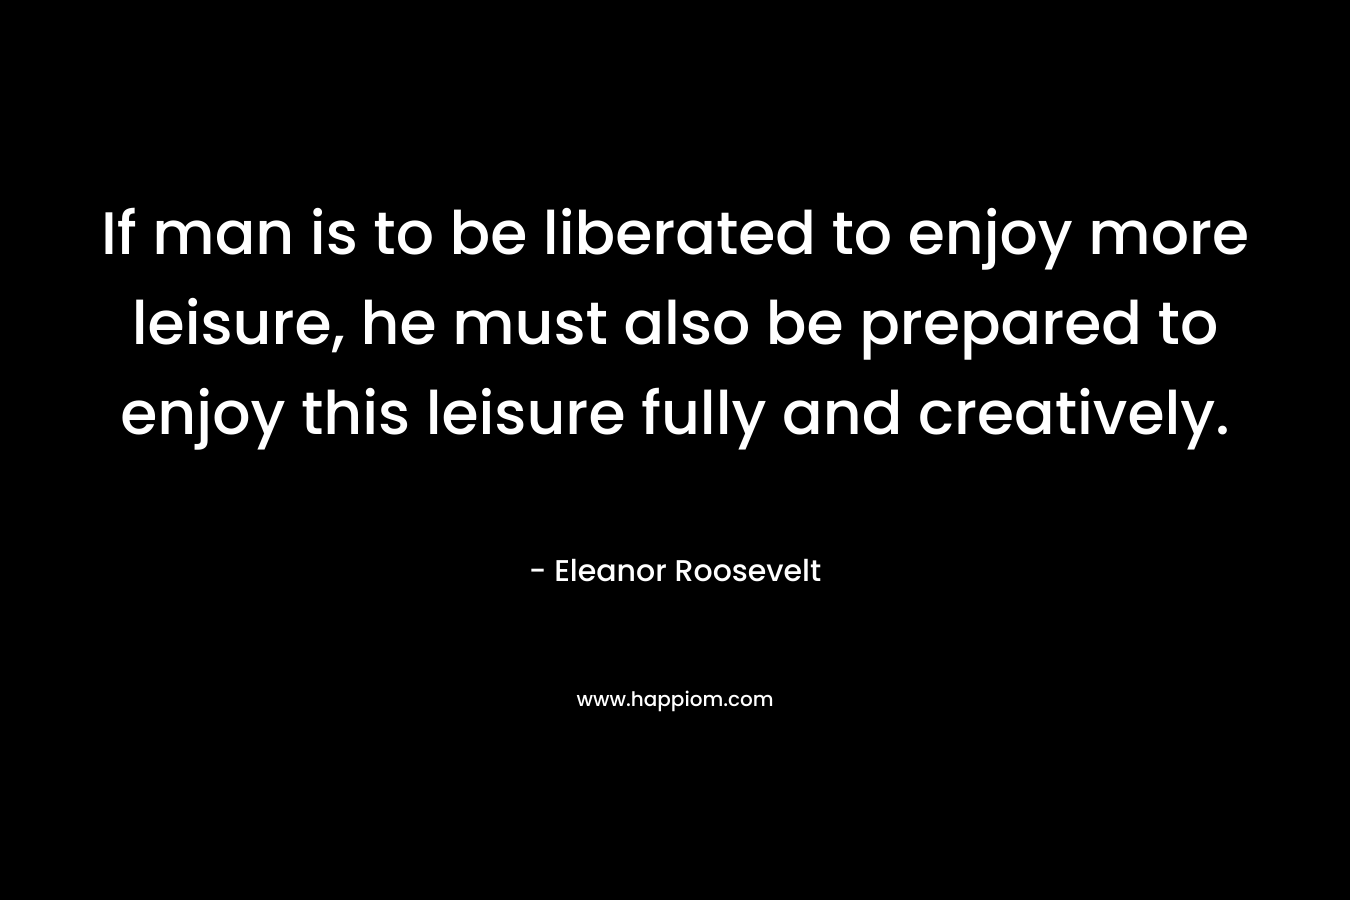 If man is to be liberated to enjoy more leisure, he must also be prepared to enjoy this leisure fully and creatively. – Eleanor Roosevelt